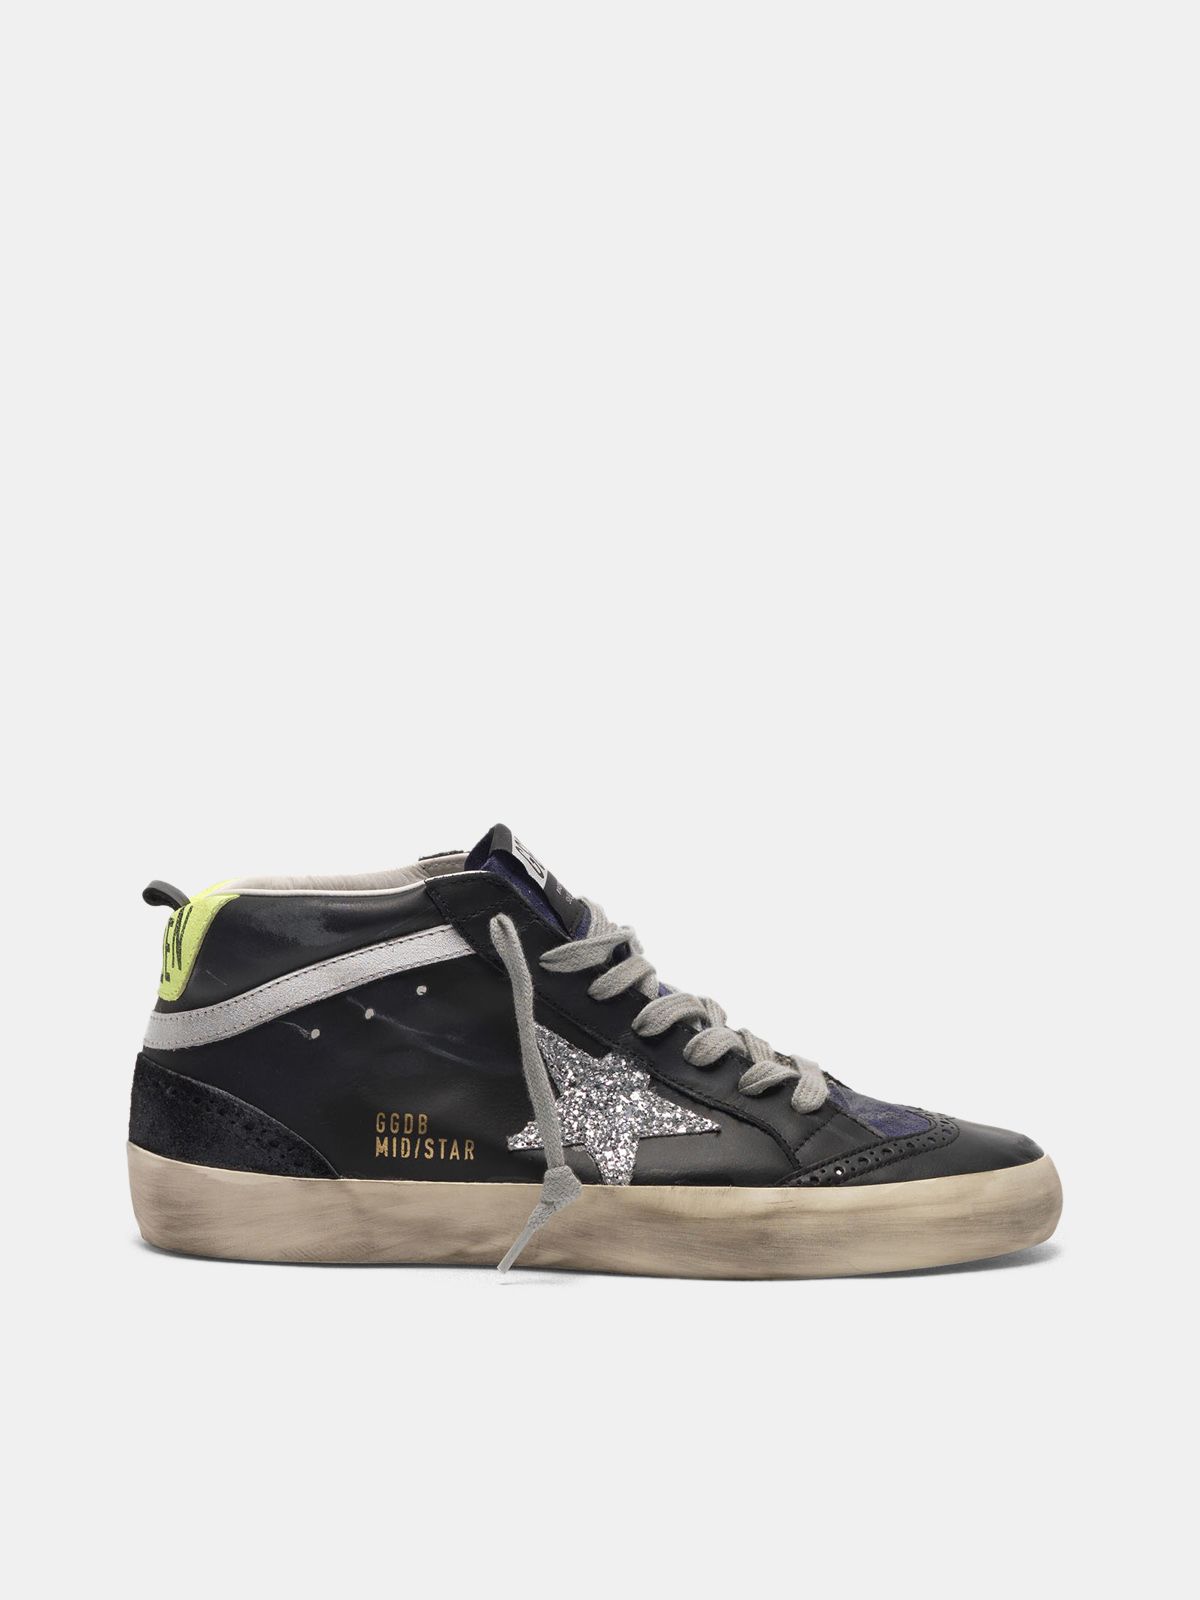 Golden Goose Sneakers Uomo Mid Star sneakers in smooth leather and suede with glitter star